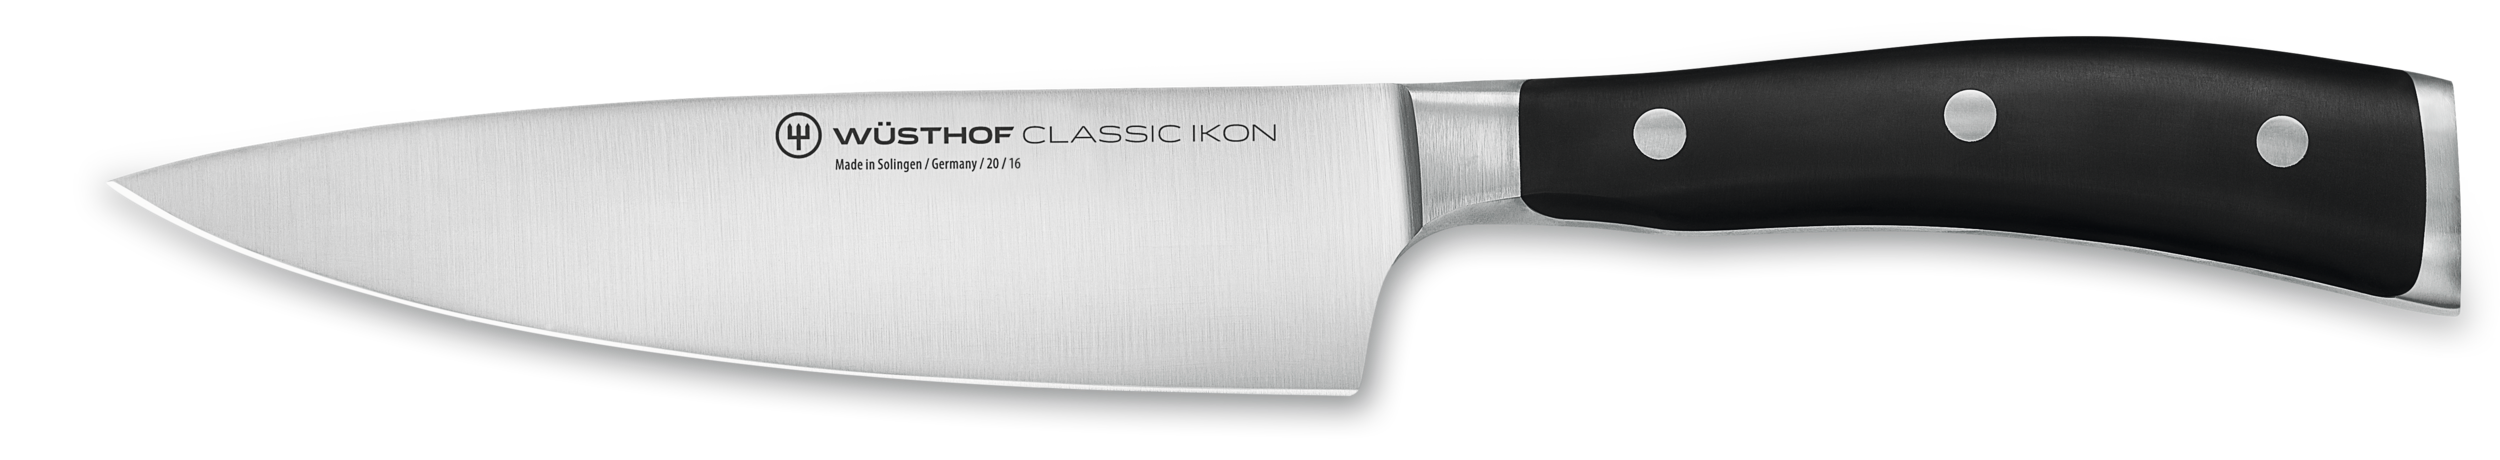 Wüsthof Classic Ikon 6 Chef's Knife + Reviews